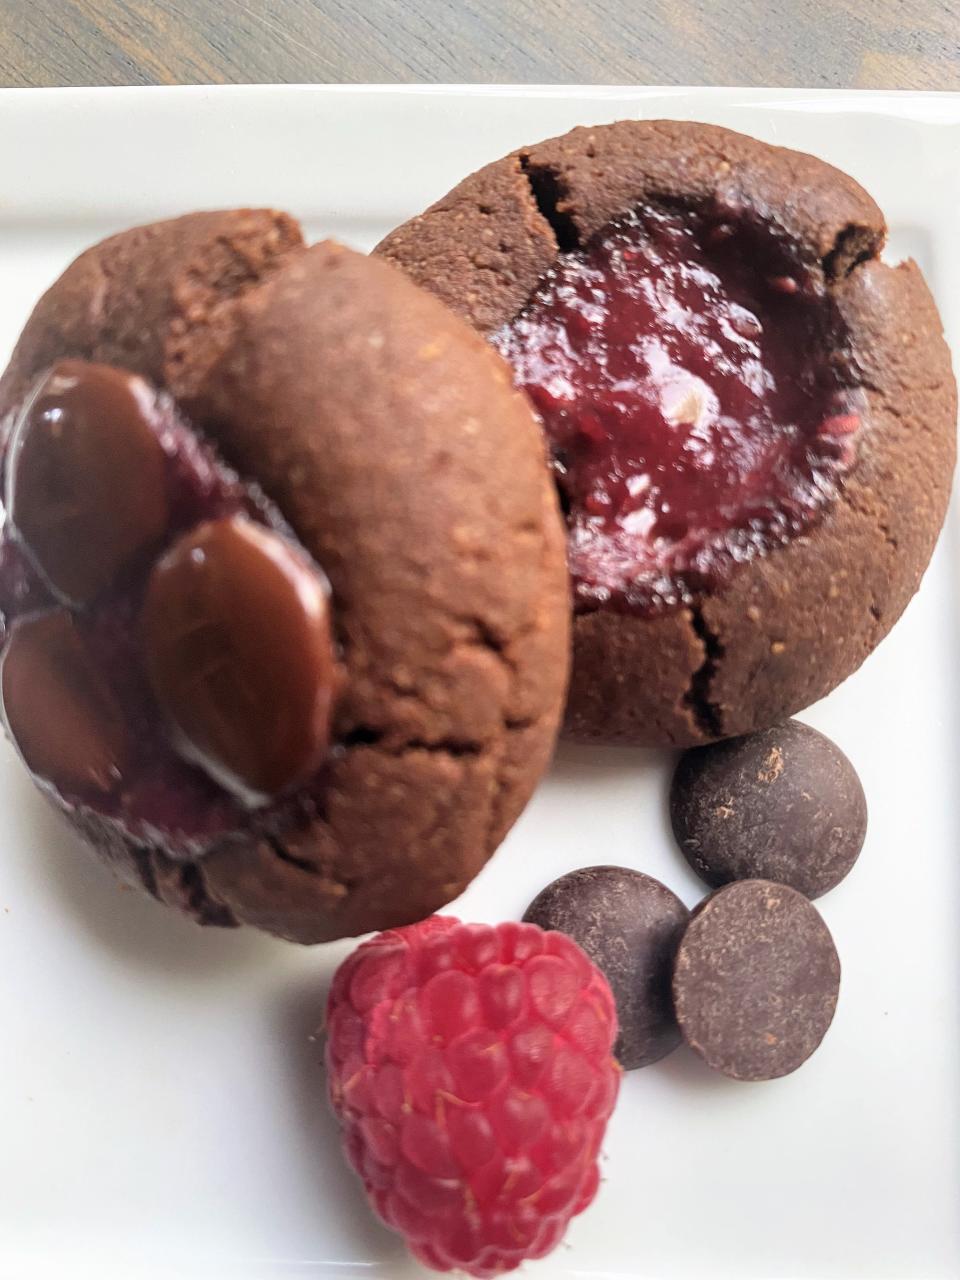 Chocolate and raspberries, already a classic combination, make for sweet and tart thumbprint cookies.